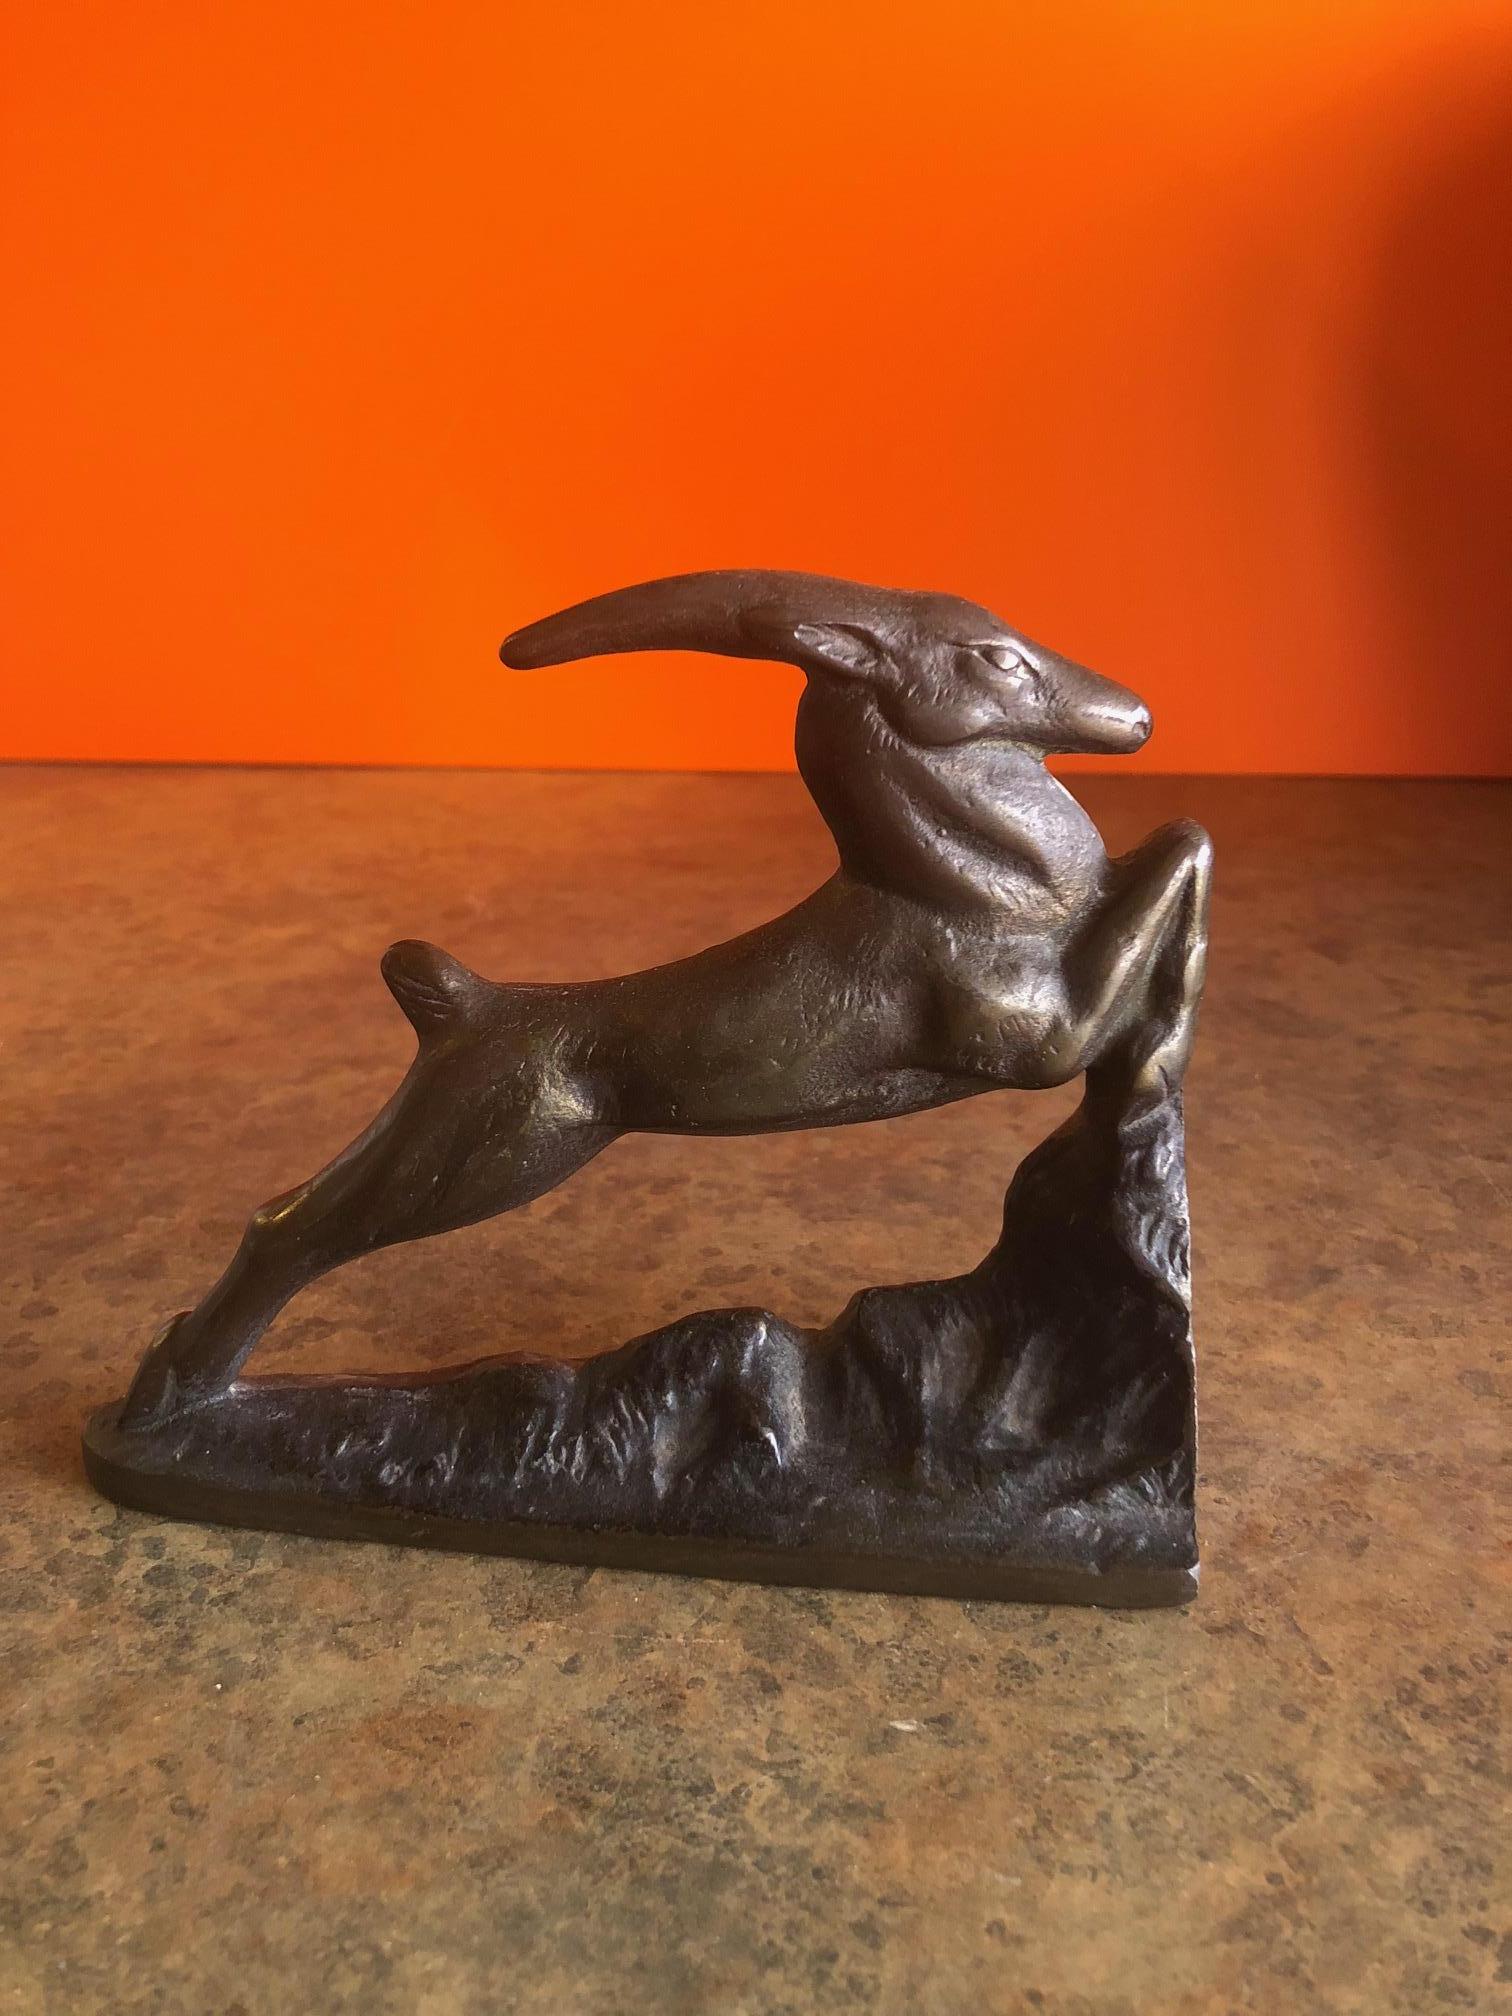 A very nice vintage Art Deco style Gazelle cast iron door stop or book end by Littlestown Hardware and Foundry of Pennsylvania, circa 1920s.

The piece is quite heavy and has a great patina and depicts a lithe, leaping gazelle with a tremendous